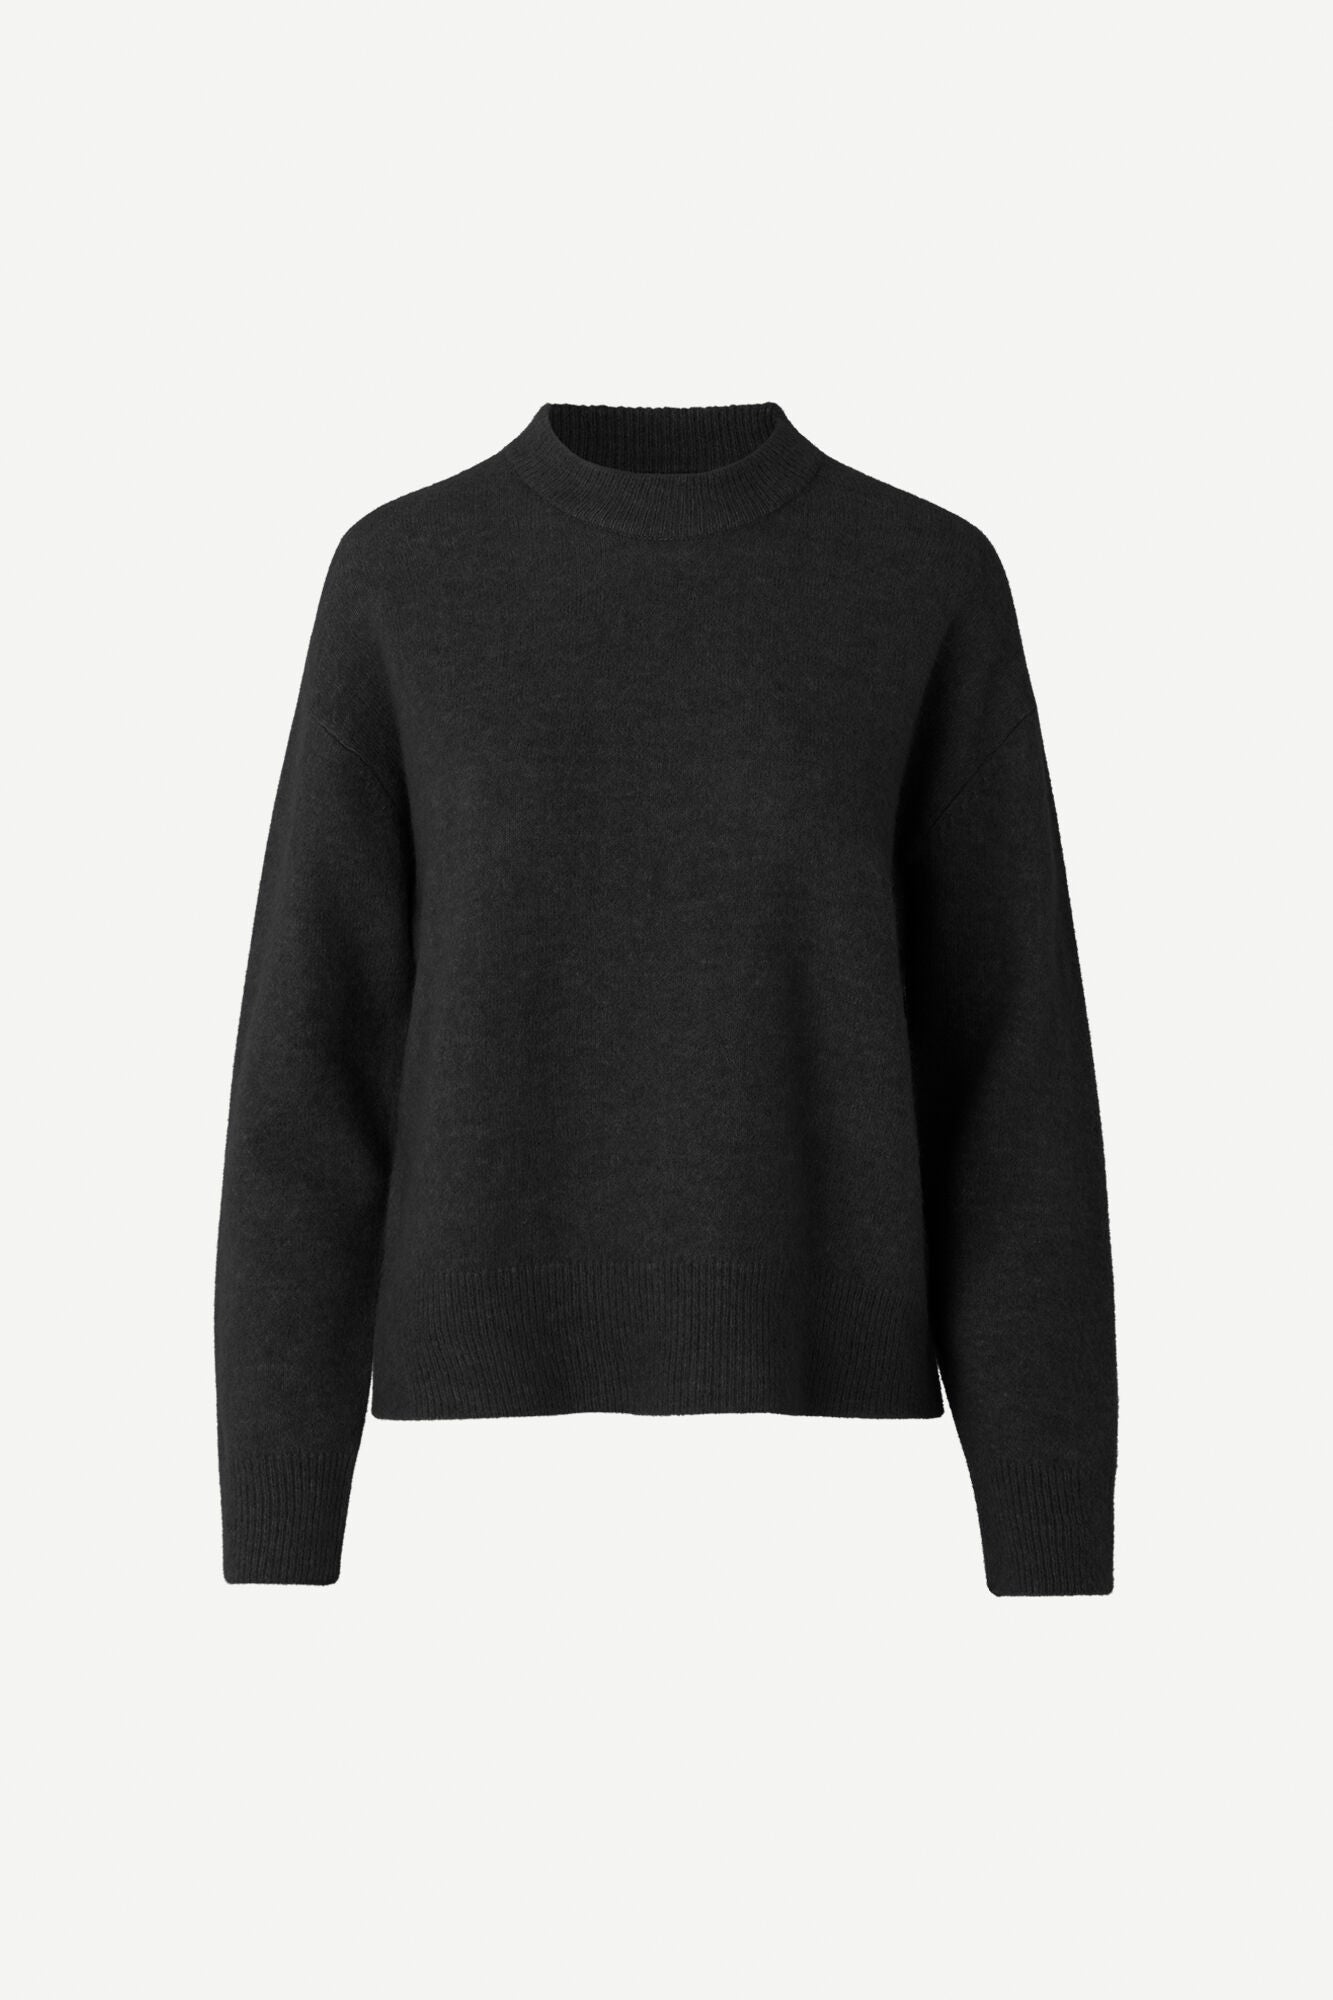 Anour knitted sweater in black